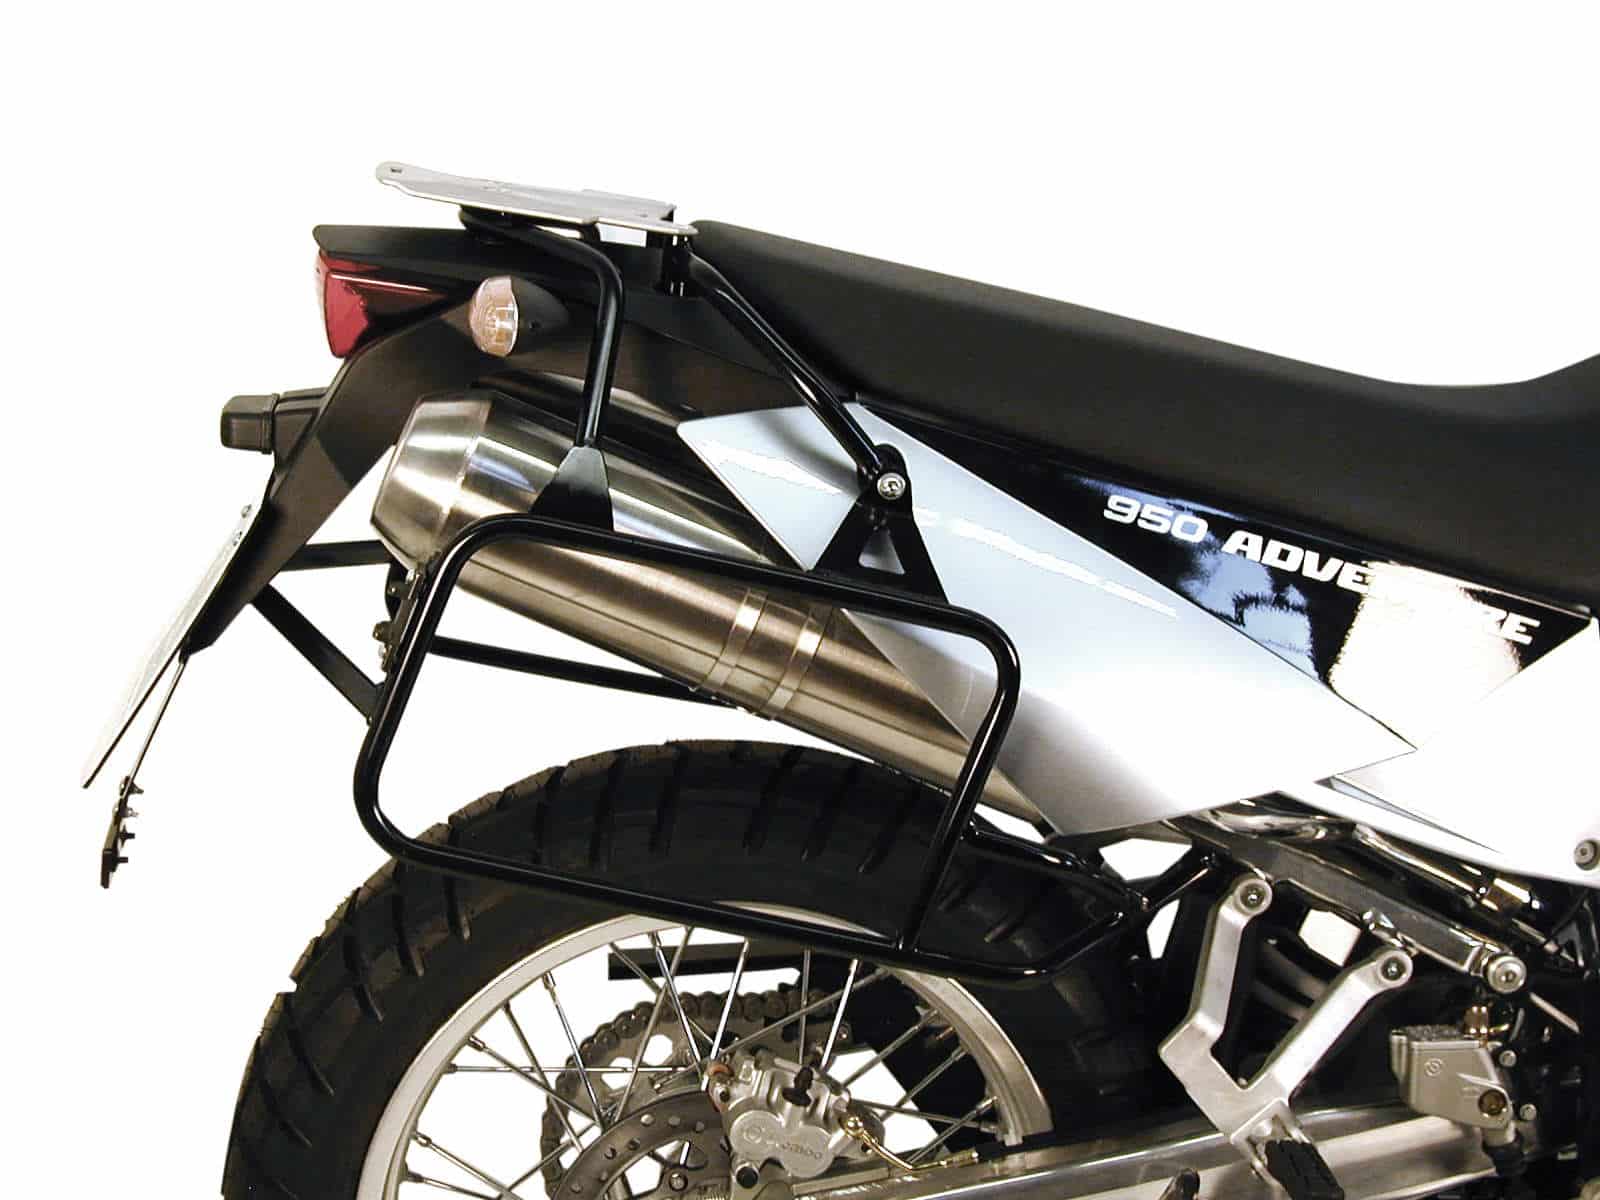 Sidecarrier permanent mounted black for KTM 950 LC 8 (2003-2005)/990 LC 8 Adventure (2006-2013)